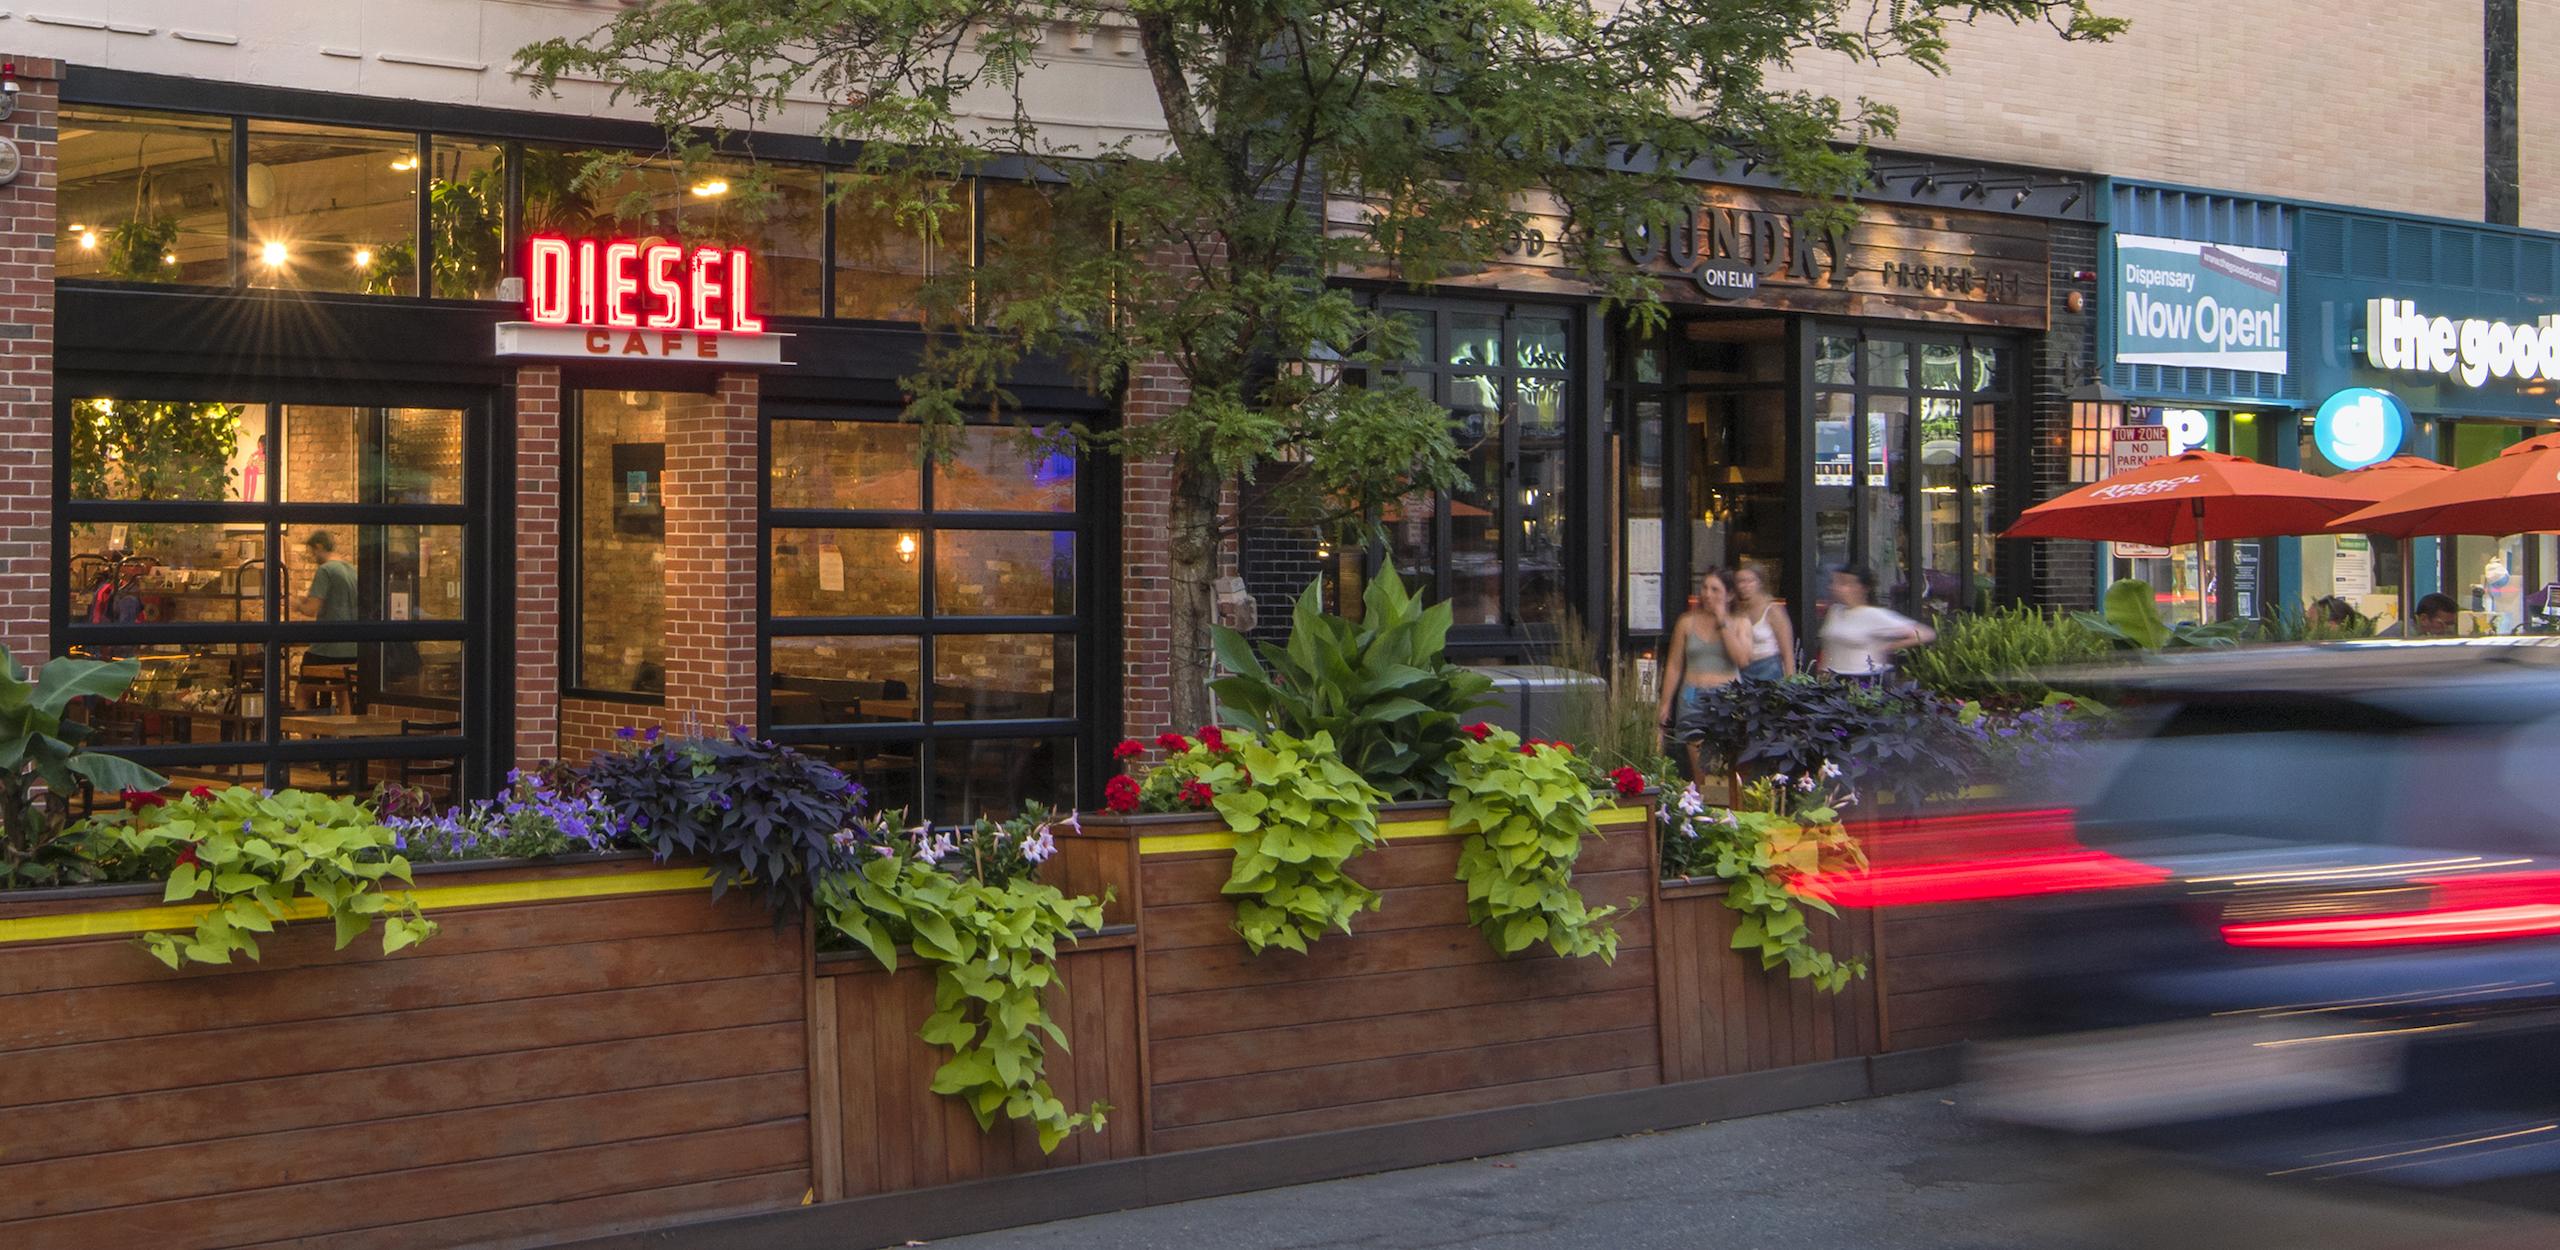 Diesel Café and adjacent shopfronts with wooden bank of seating and planters between sidewalk and roadway.